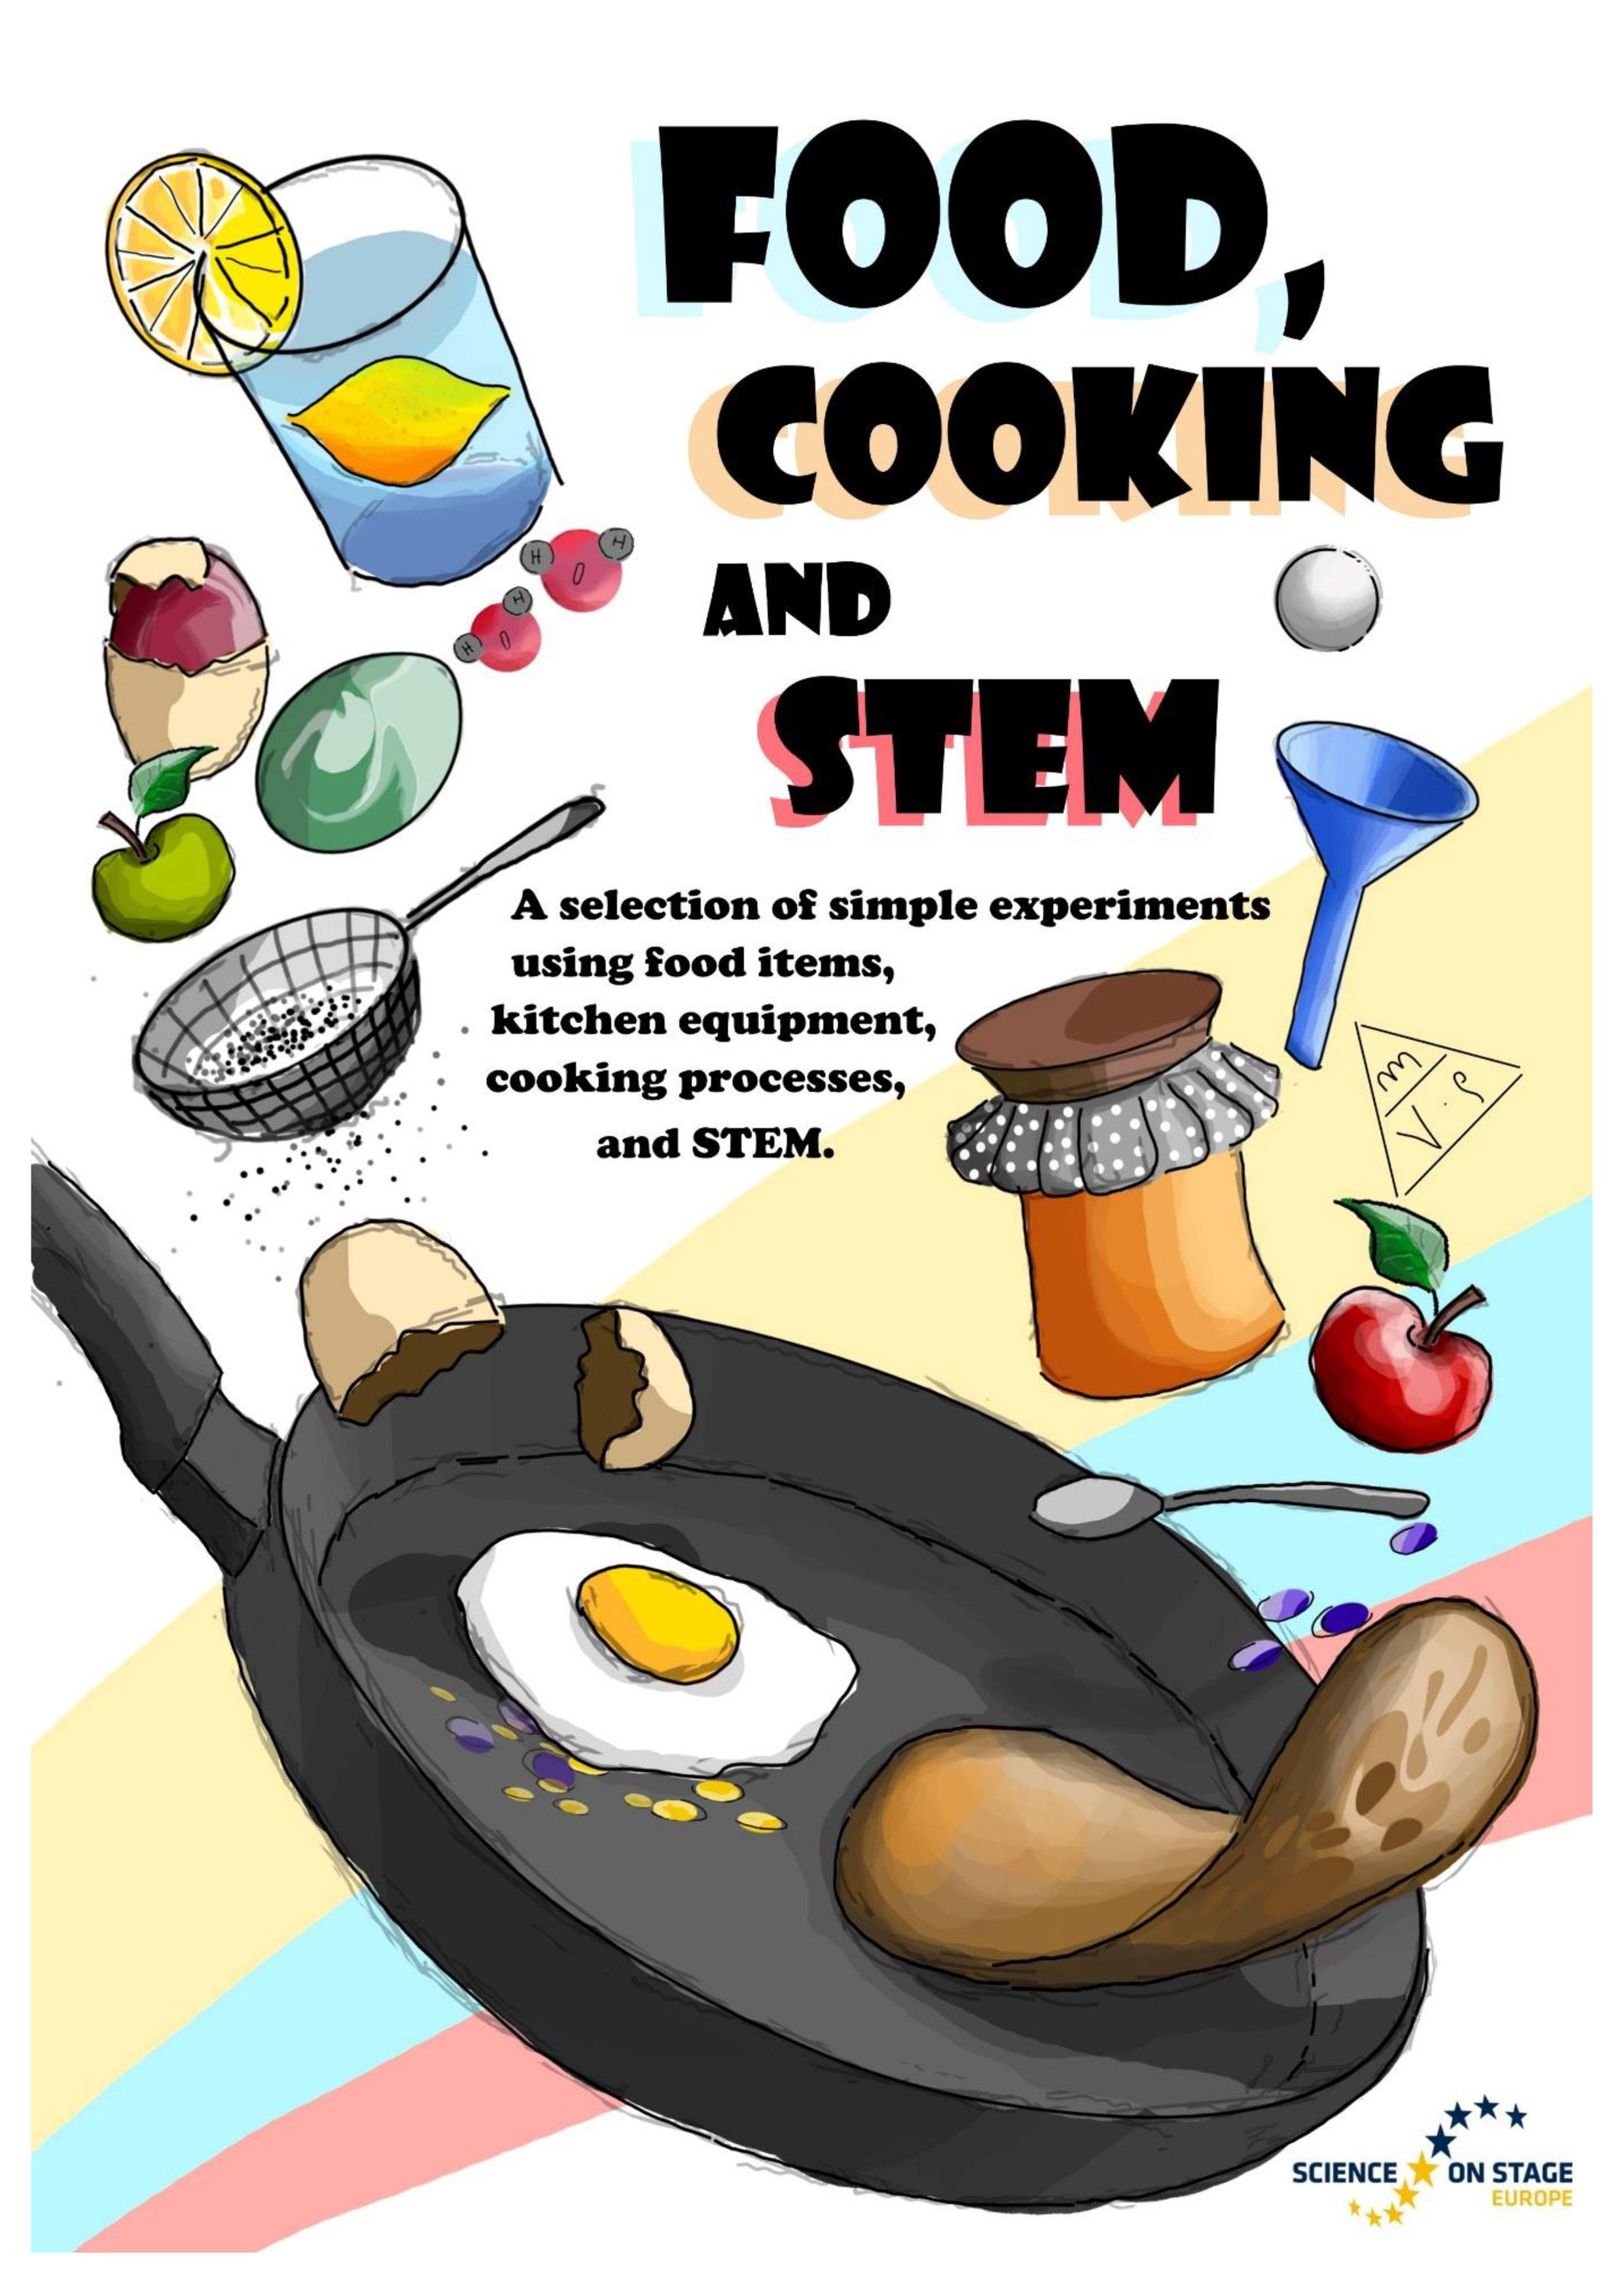 Cover image of the publication "Food, Cooking and STEM" showing a frying pan and various food items